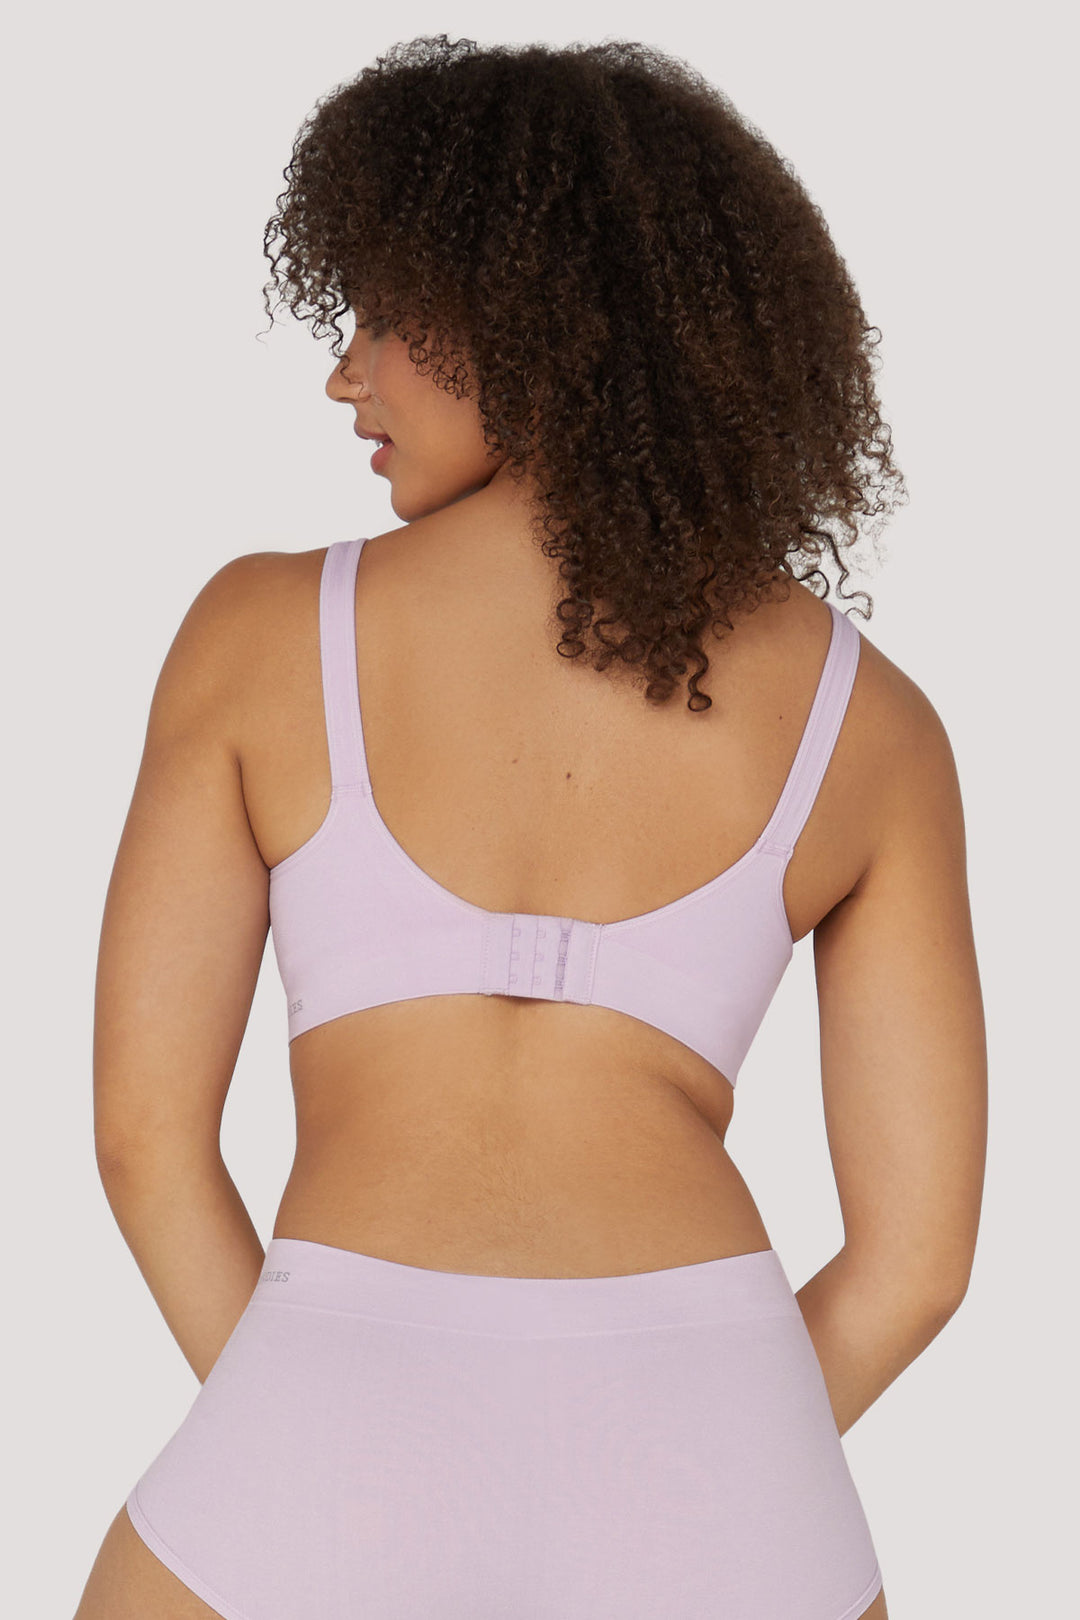 Which Bras Offer the Best Side Support? - Belle Lingerie